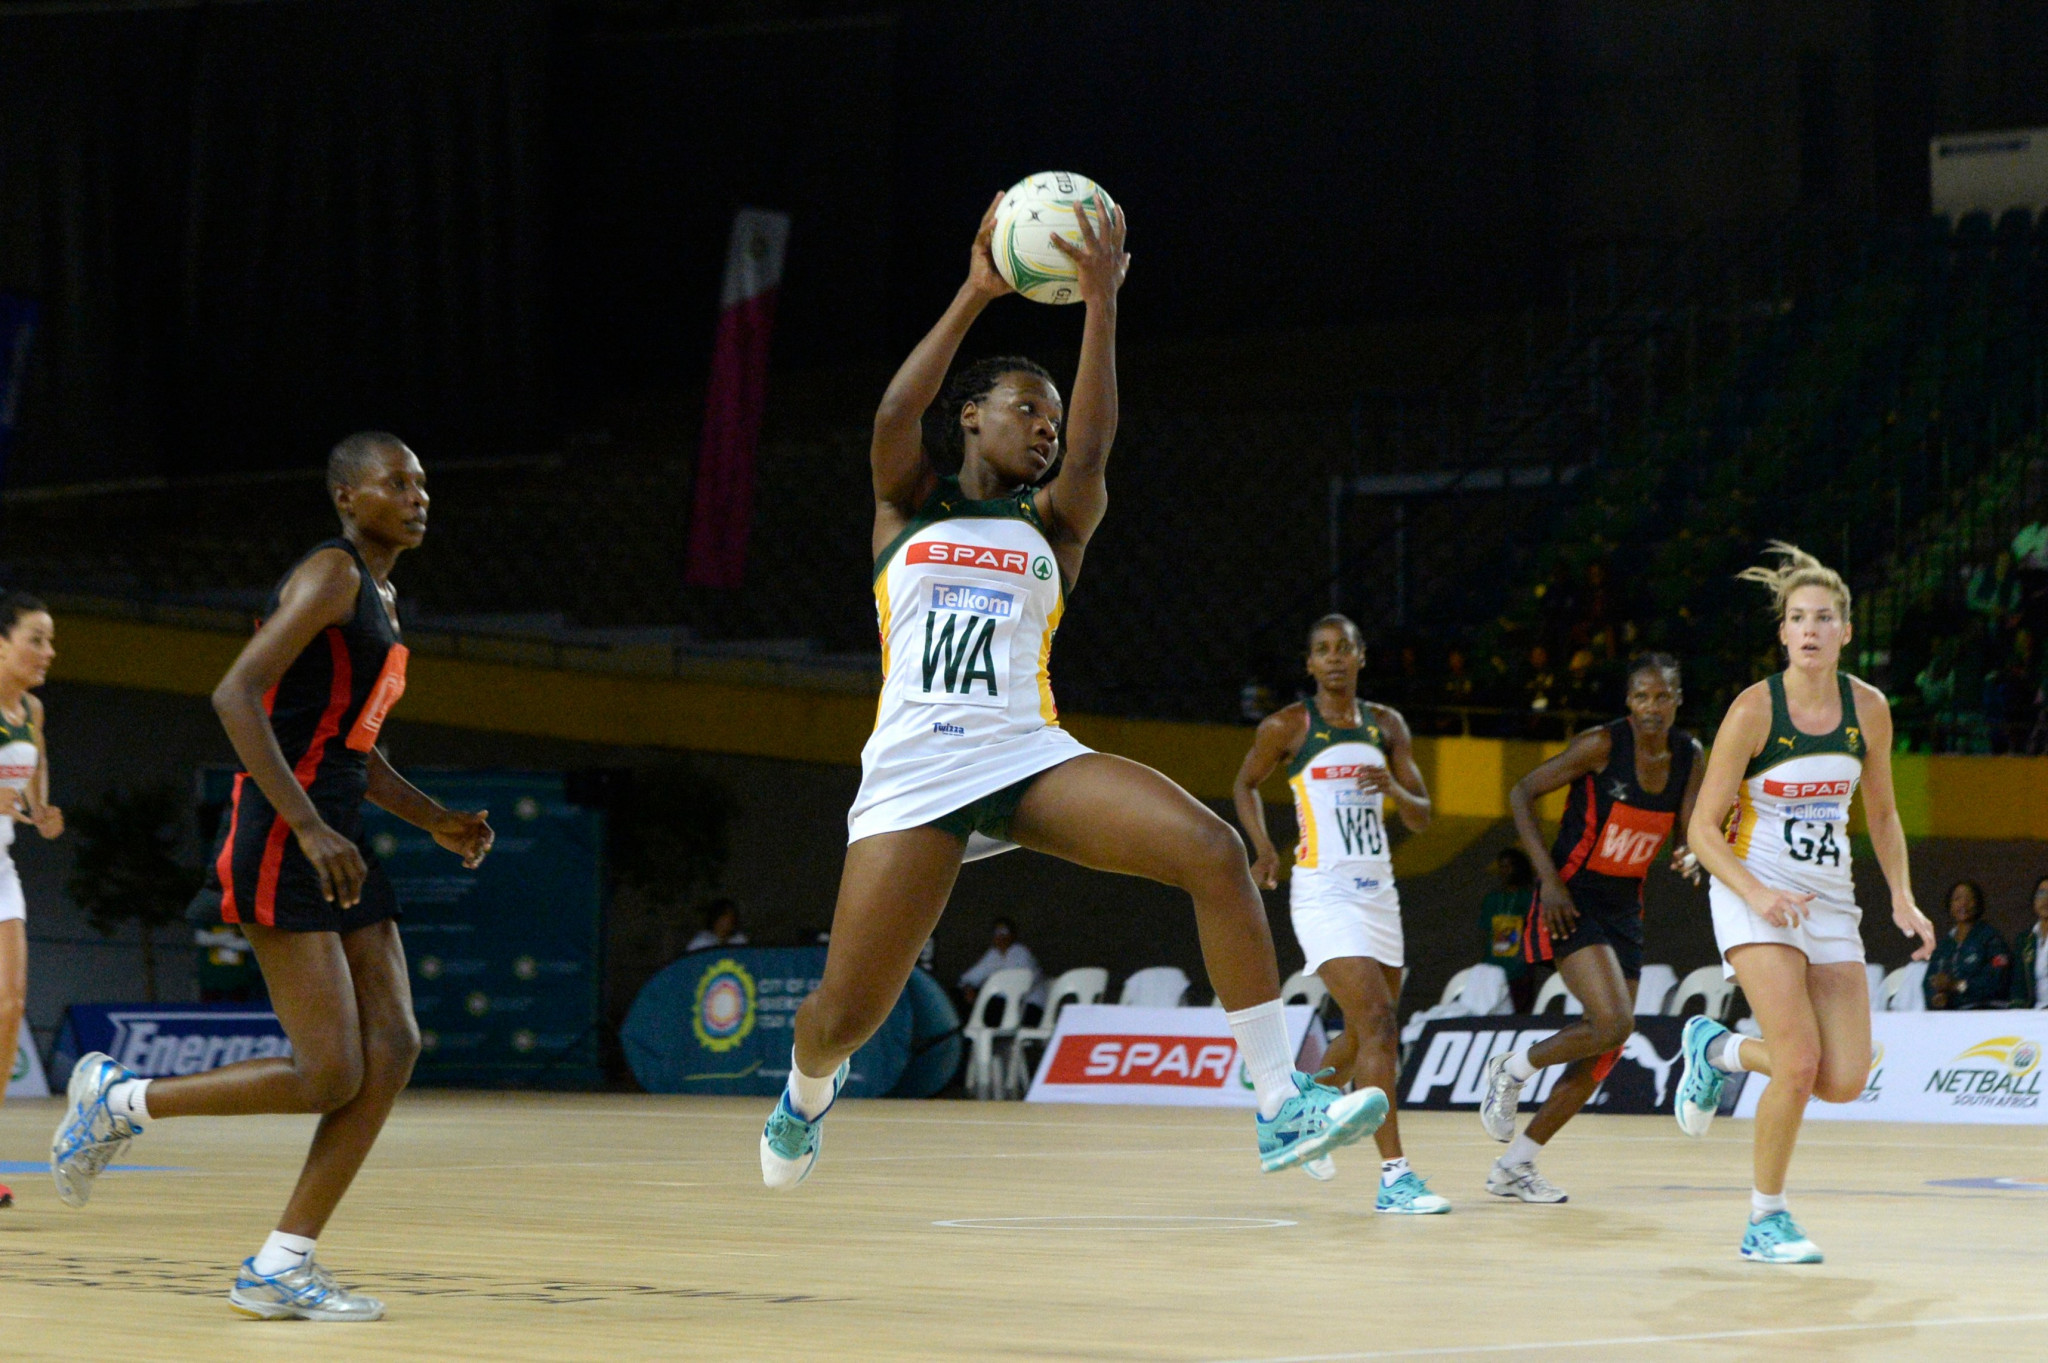 South Africa defeat Zambia to clinch Africa Netball Cup in Cape Town